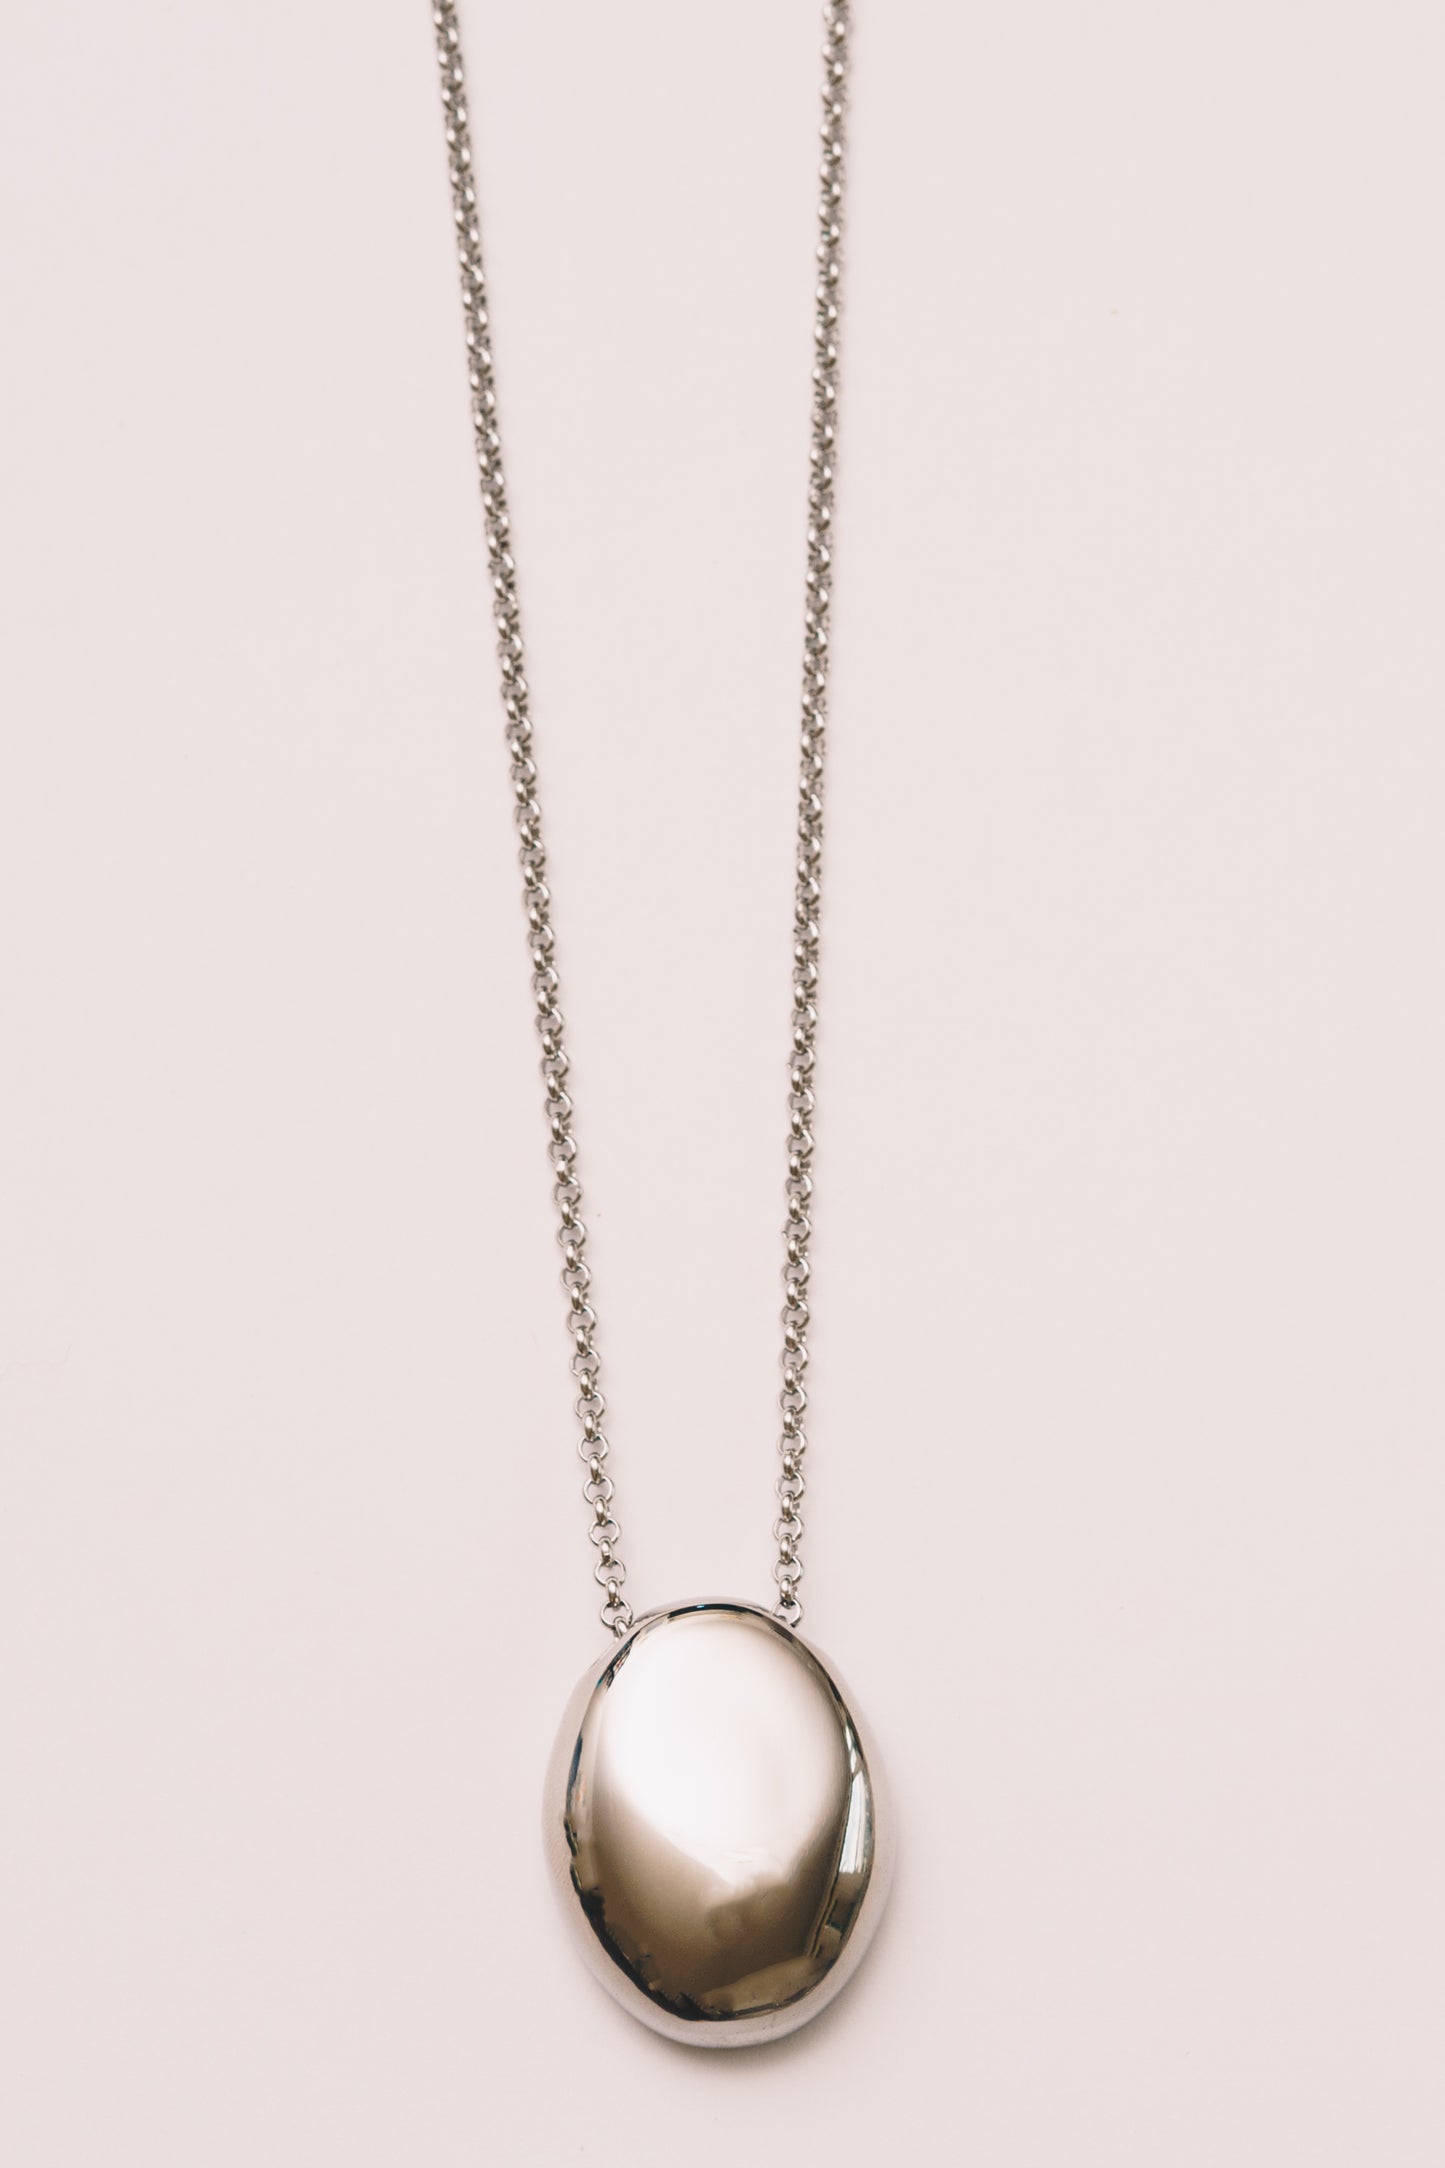 minimal necklace in silver pendant layering necklace in shiny finish on white background